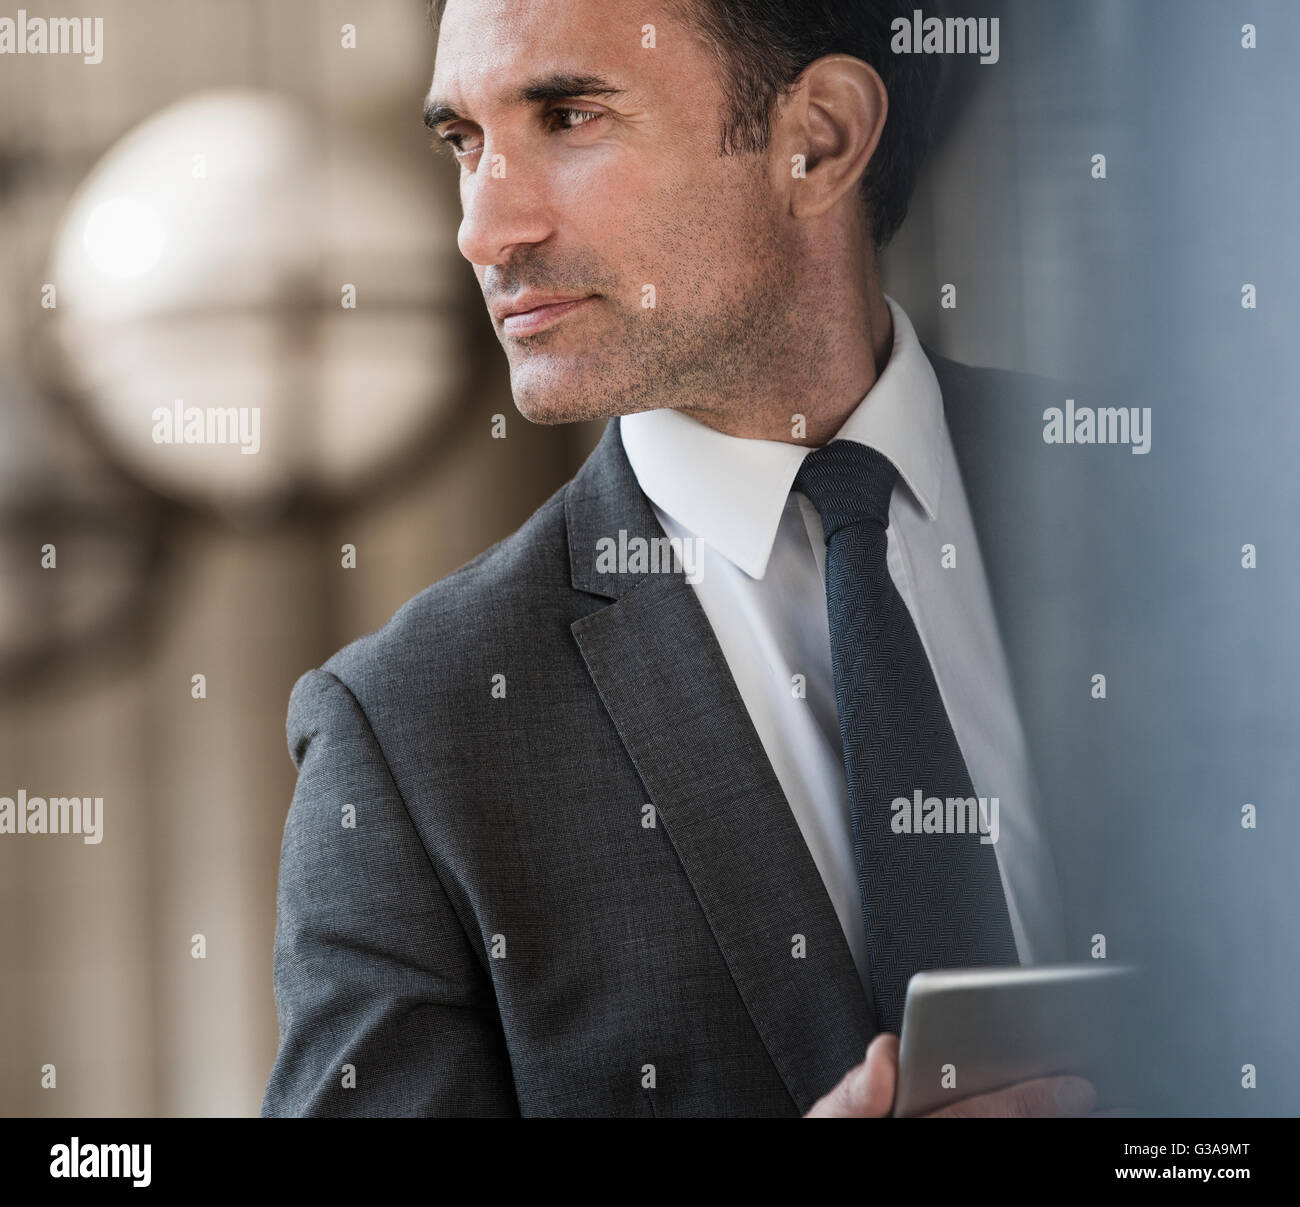 Pensive corporate businessman with digital tablet looking away Stock Photo